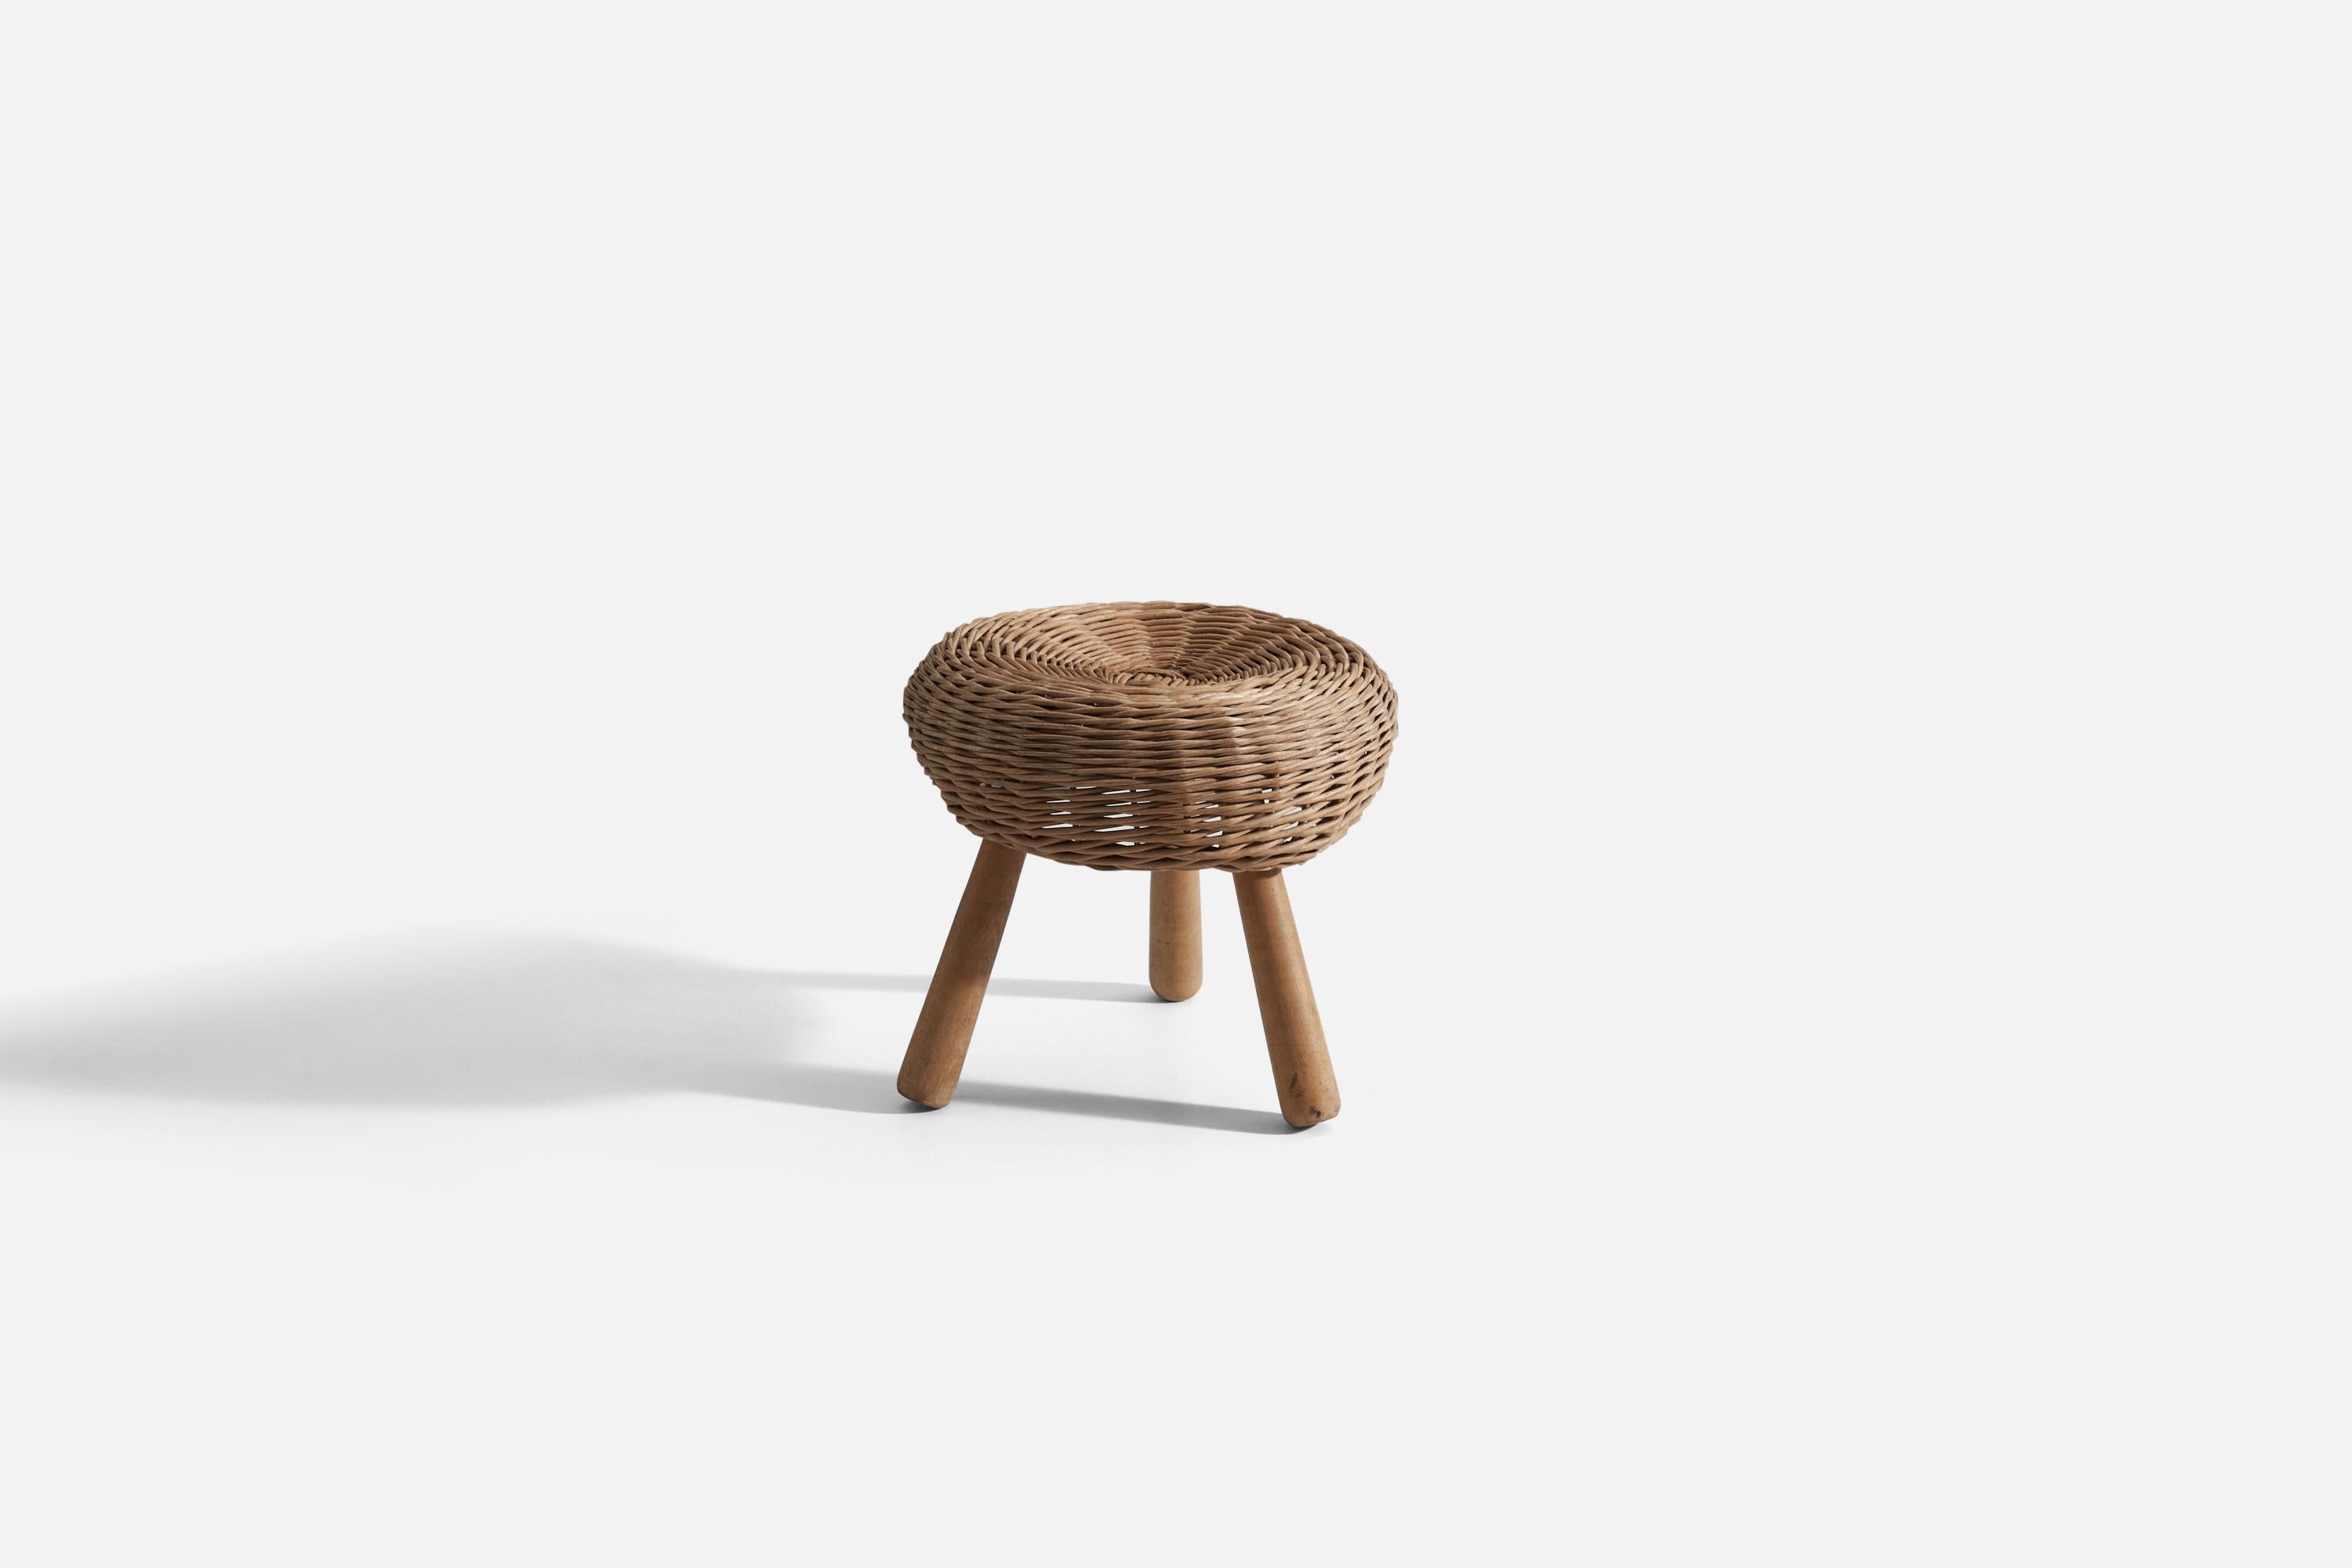 American Tony Paul 'Attributed' Stool, Wicker, Wood, United States, 1950s For Sale